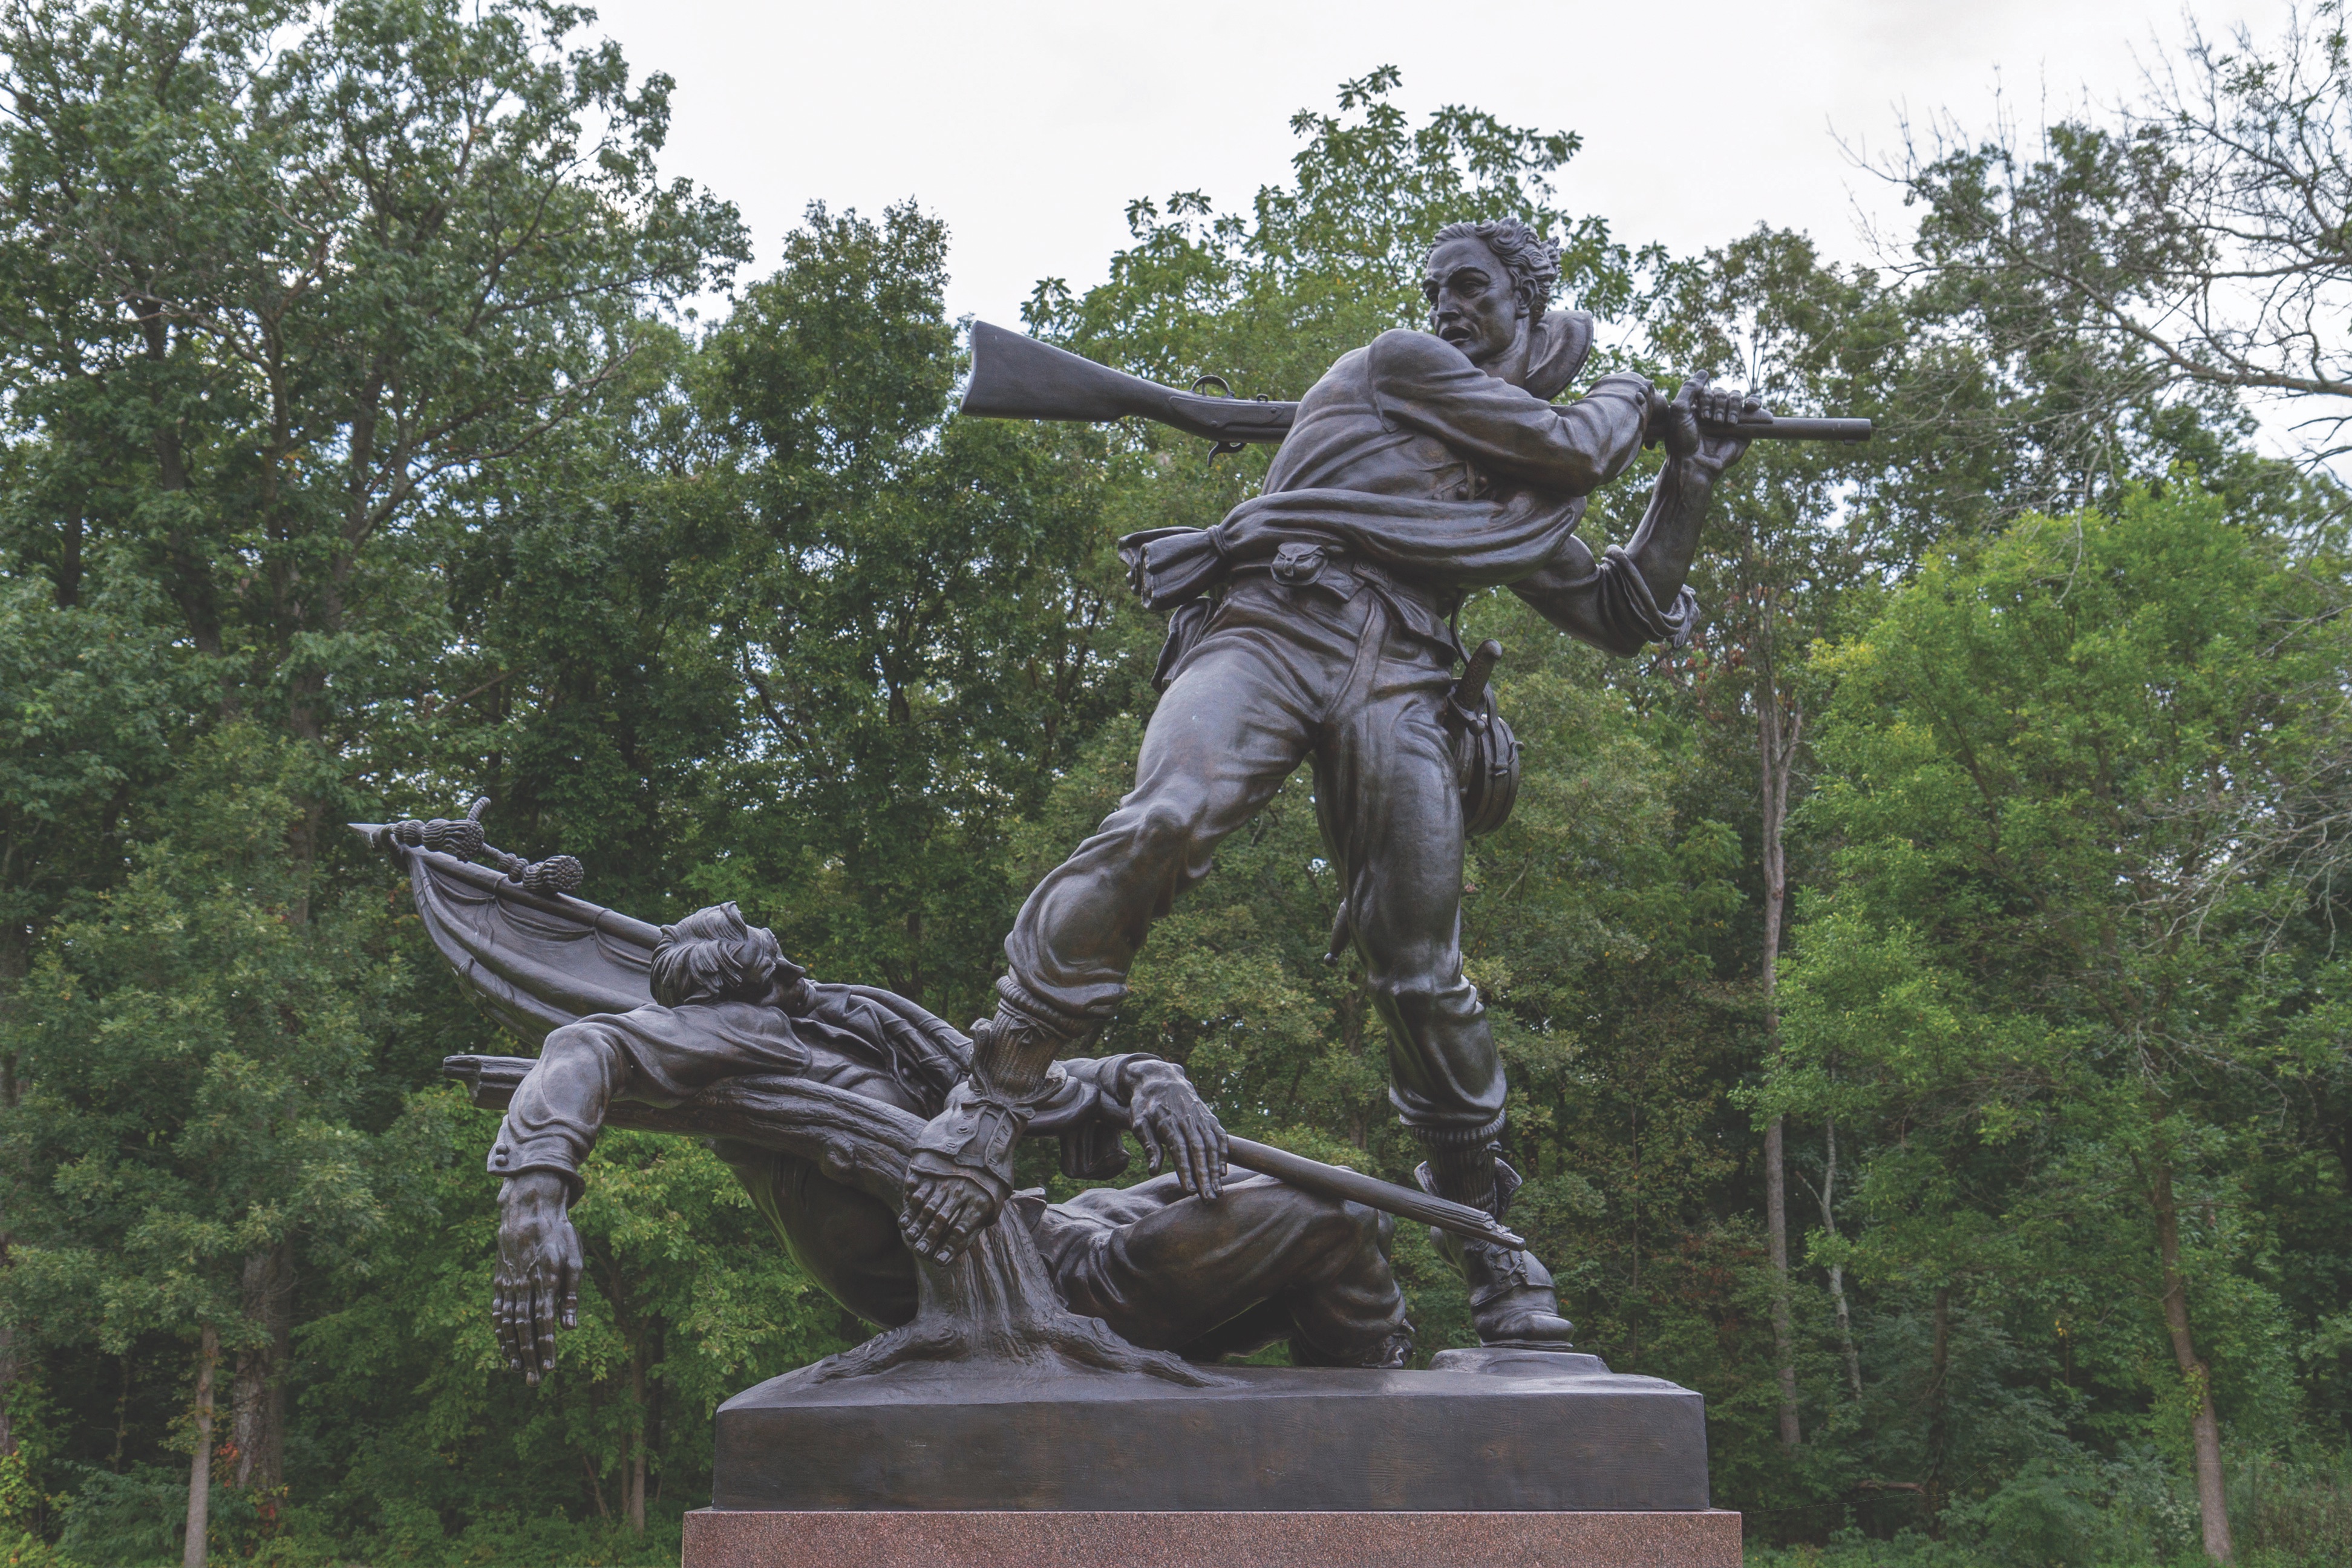 The Mississippi State Monument depicts a soldier defending the “righteous cause” of the South. (Maurice Savage/Alamy Stock Photo)